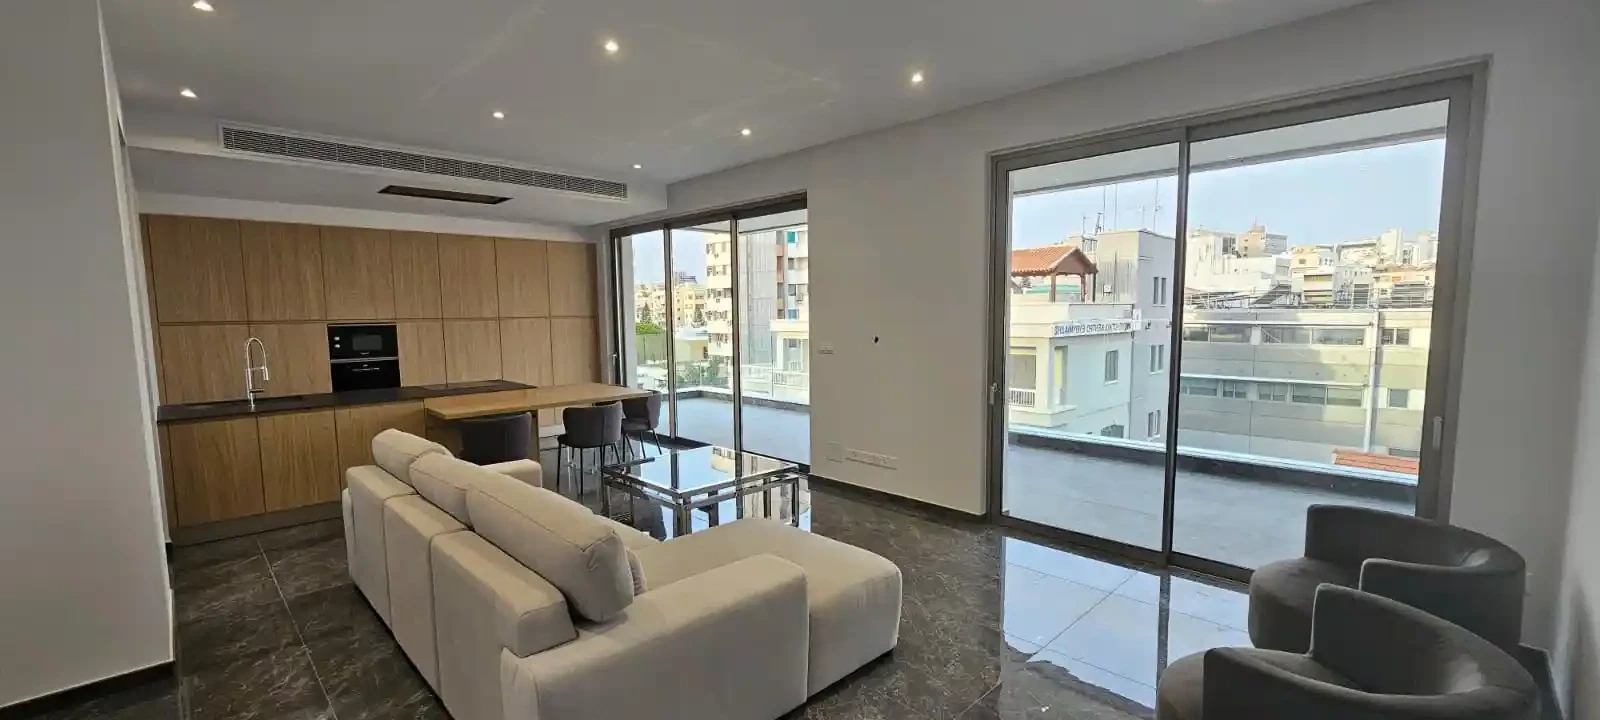 3-bedroom apartment to rent €2.100, image 1